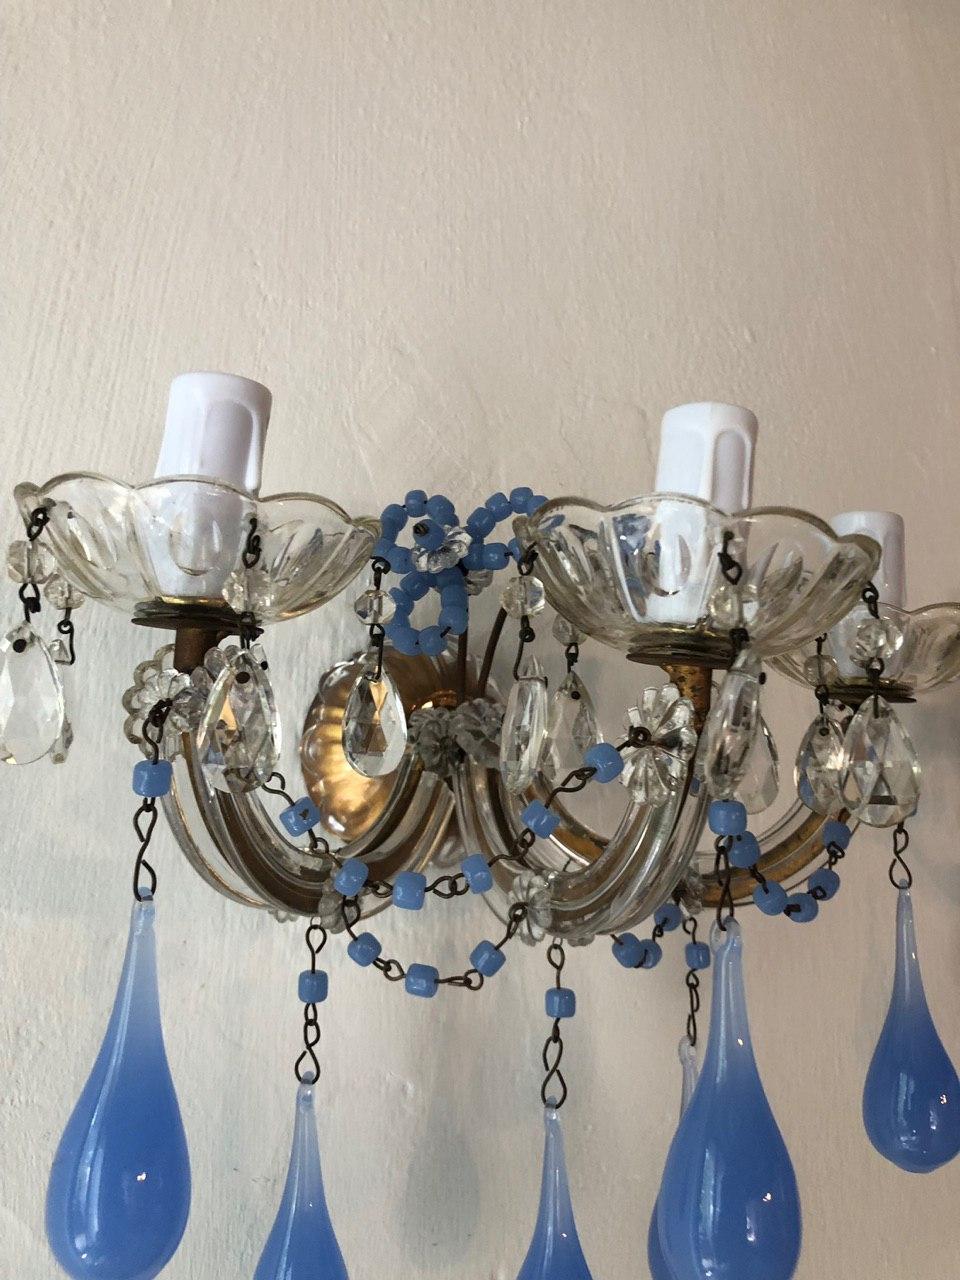 Re-wired and ready to hang! Housing three lights each, sitting in crystal bobeches dripping with crystal prisms. Adorning rare big periwinkle opaline drops as well. Some pictures with the flash make the color look blue, these are true periwinkle